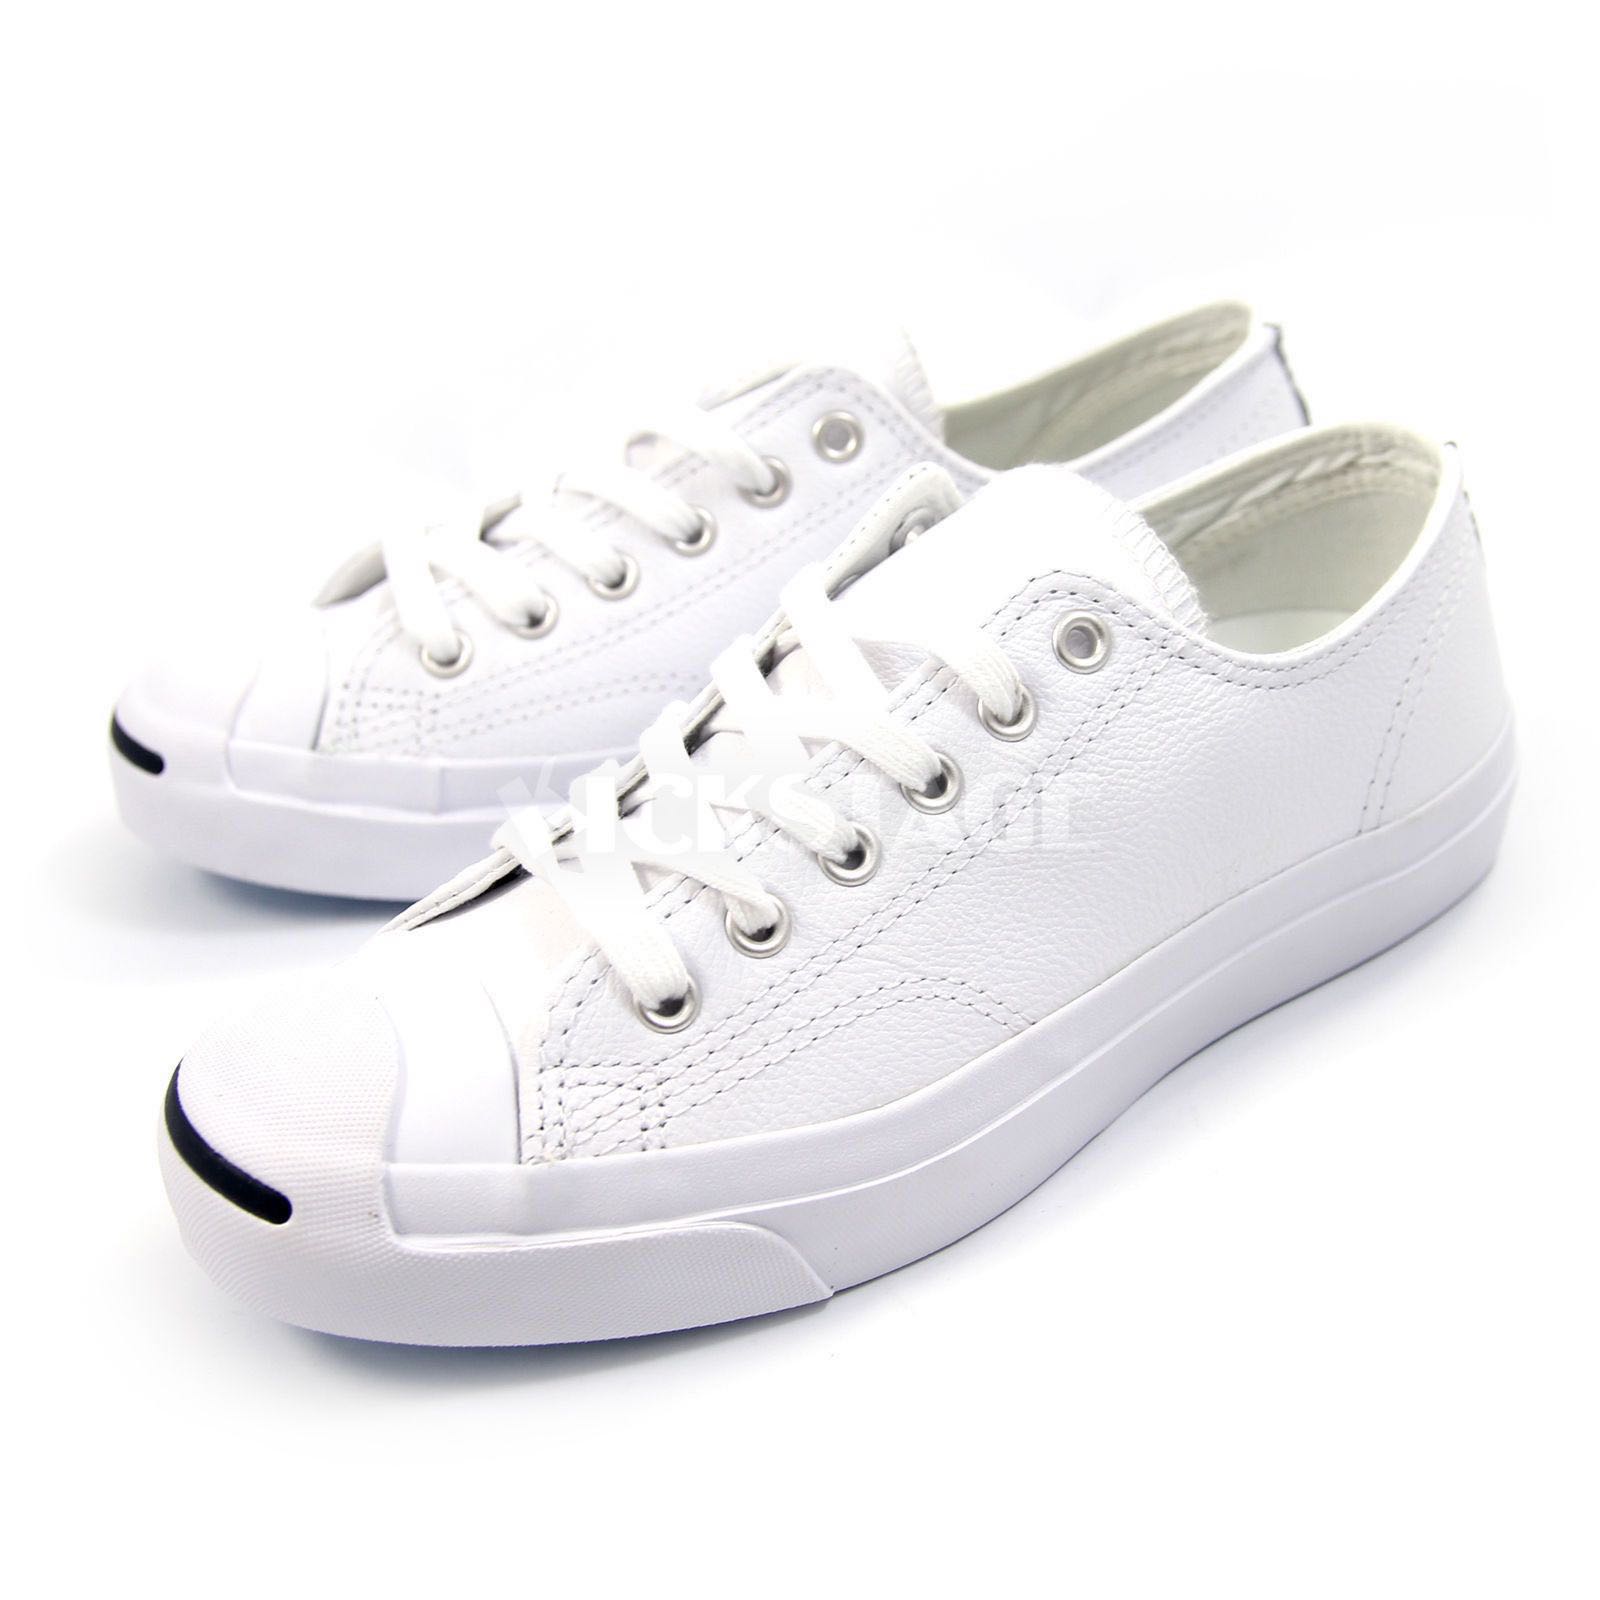 Authentic jack Purcell converse white 